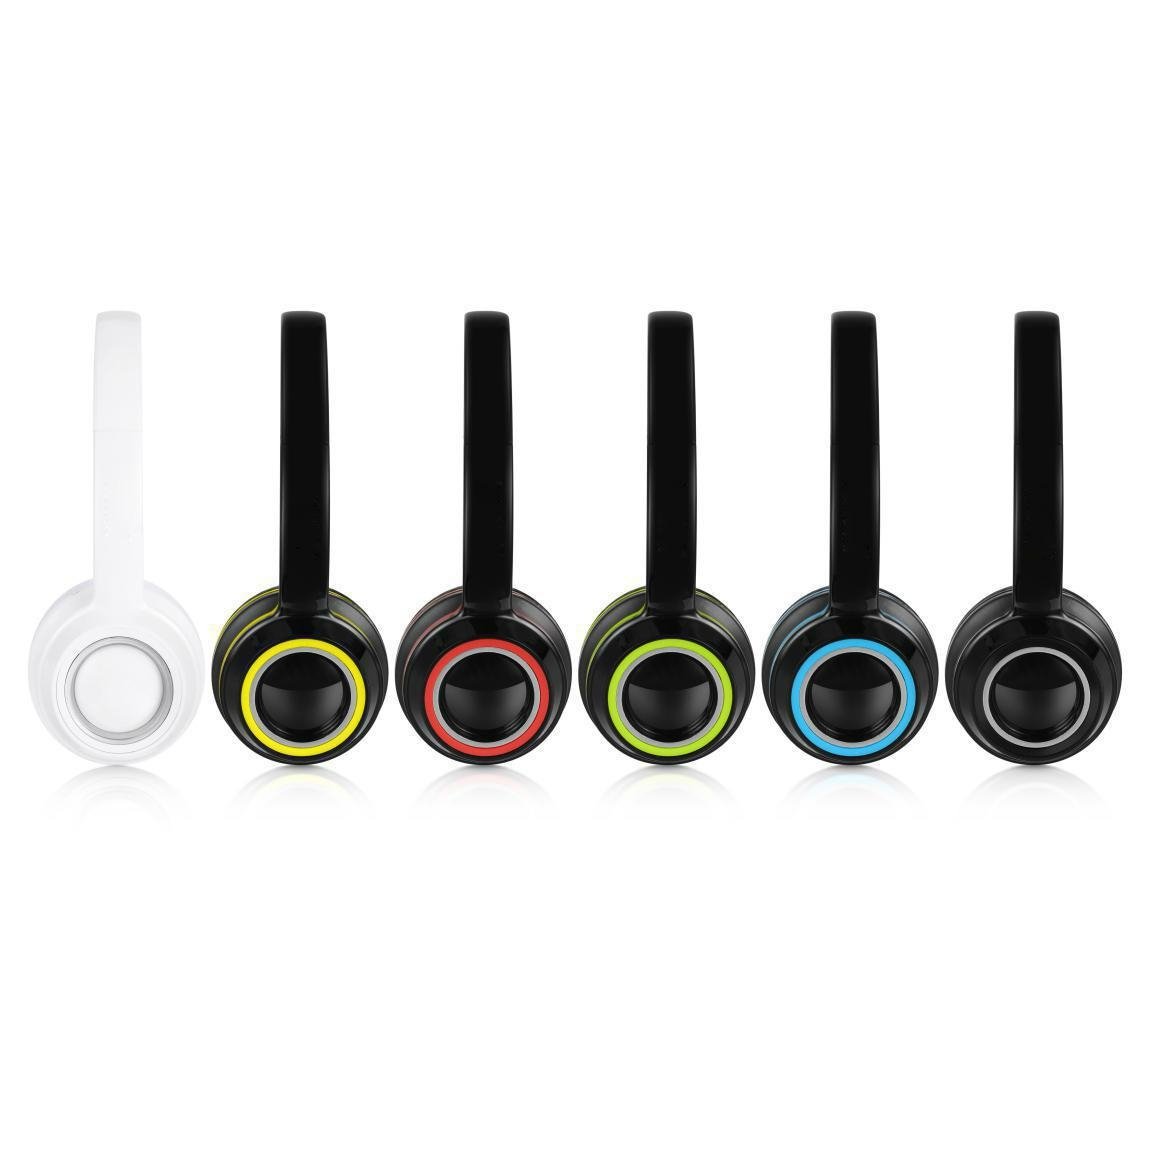 Colorfull Foldable portable mobile headphones for promotion as gift 4